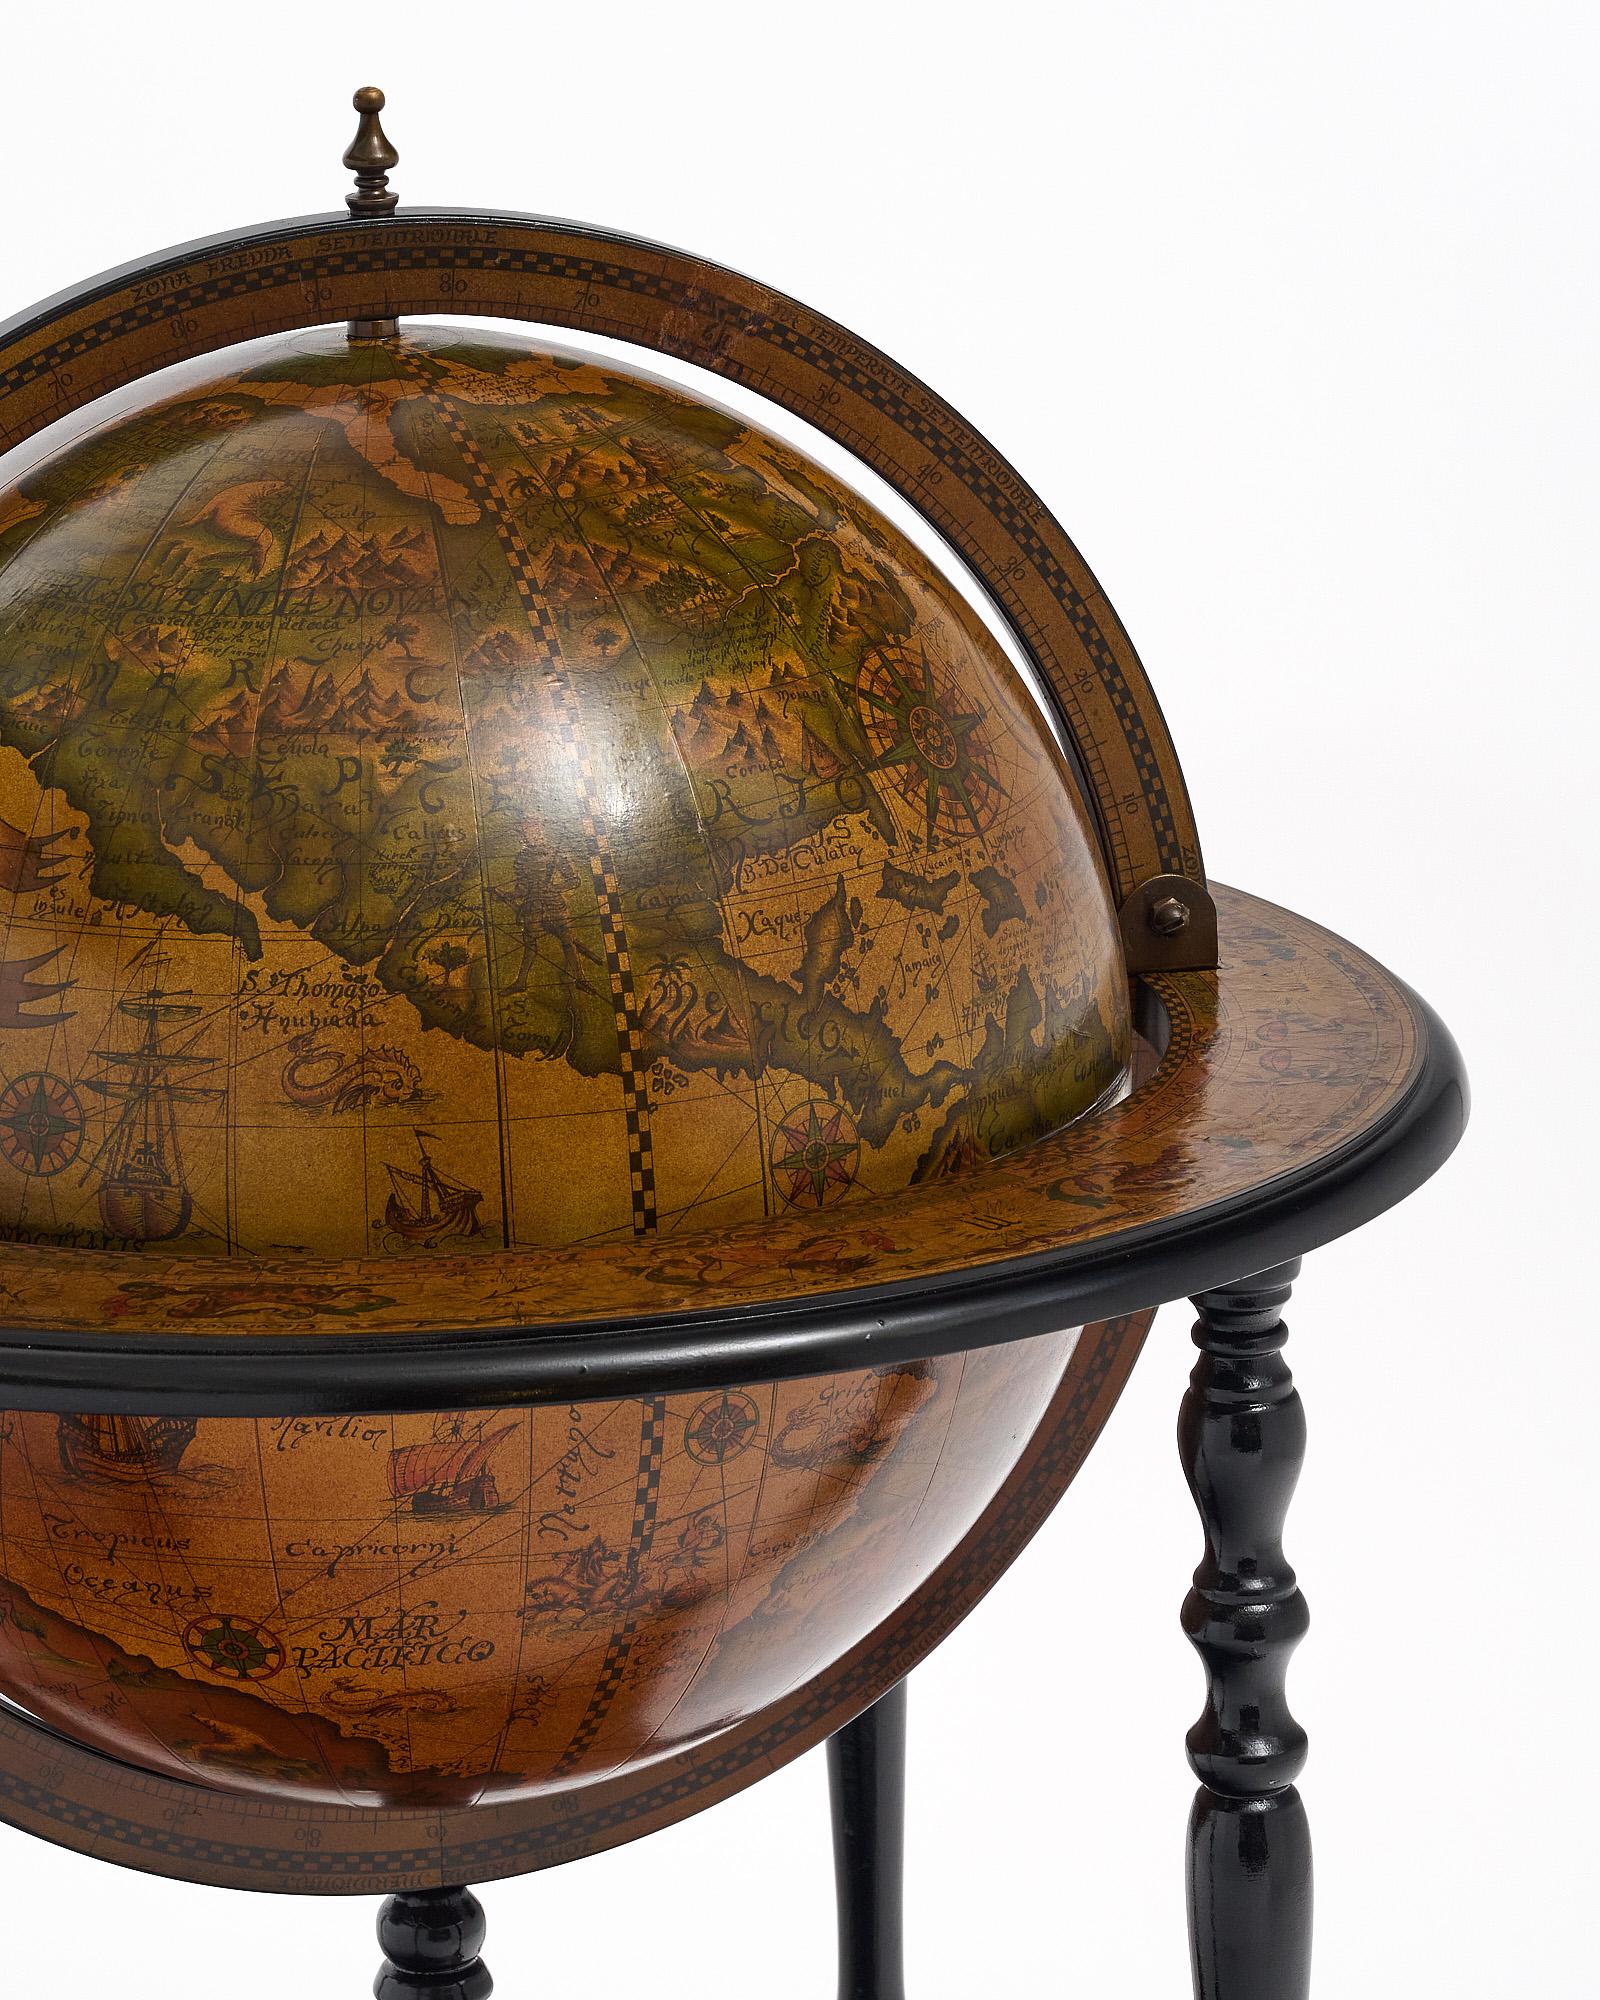 Globe from Italy with hand-painted décor from the 20th century in Italy. The globe rotates and is supported by an intricate, hand-carved ebonized four-legged structure on casters. The globe opens to a fully featured bar with bottle holders. The